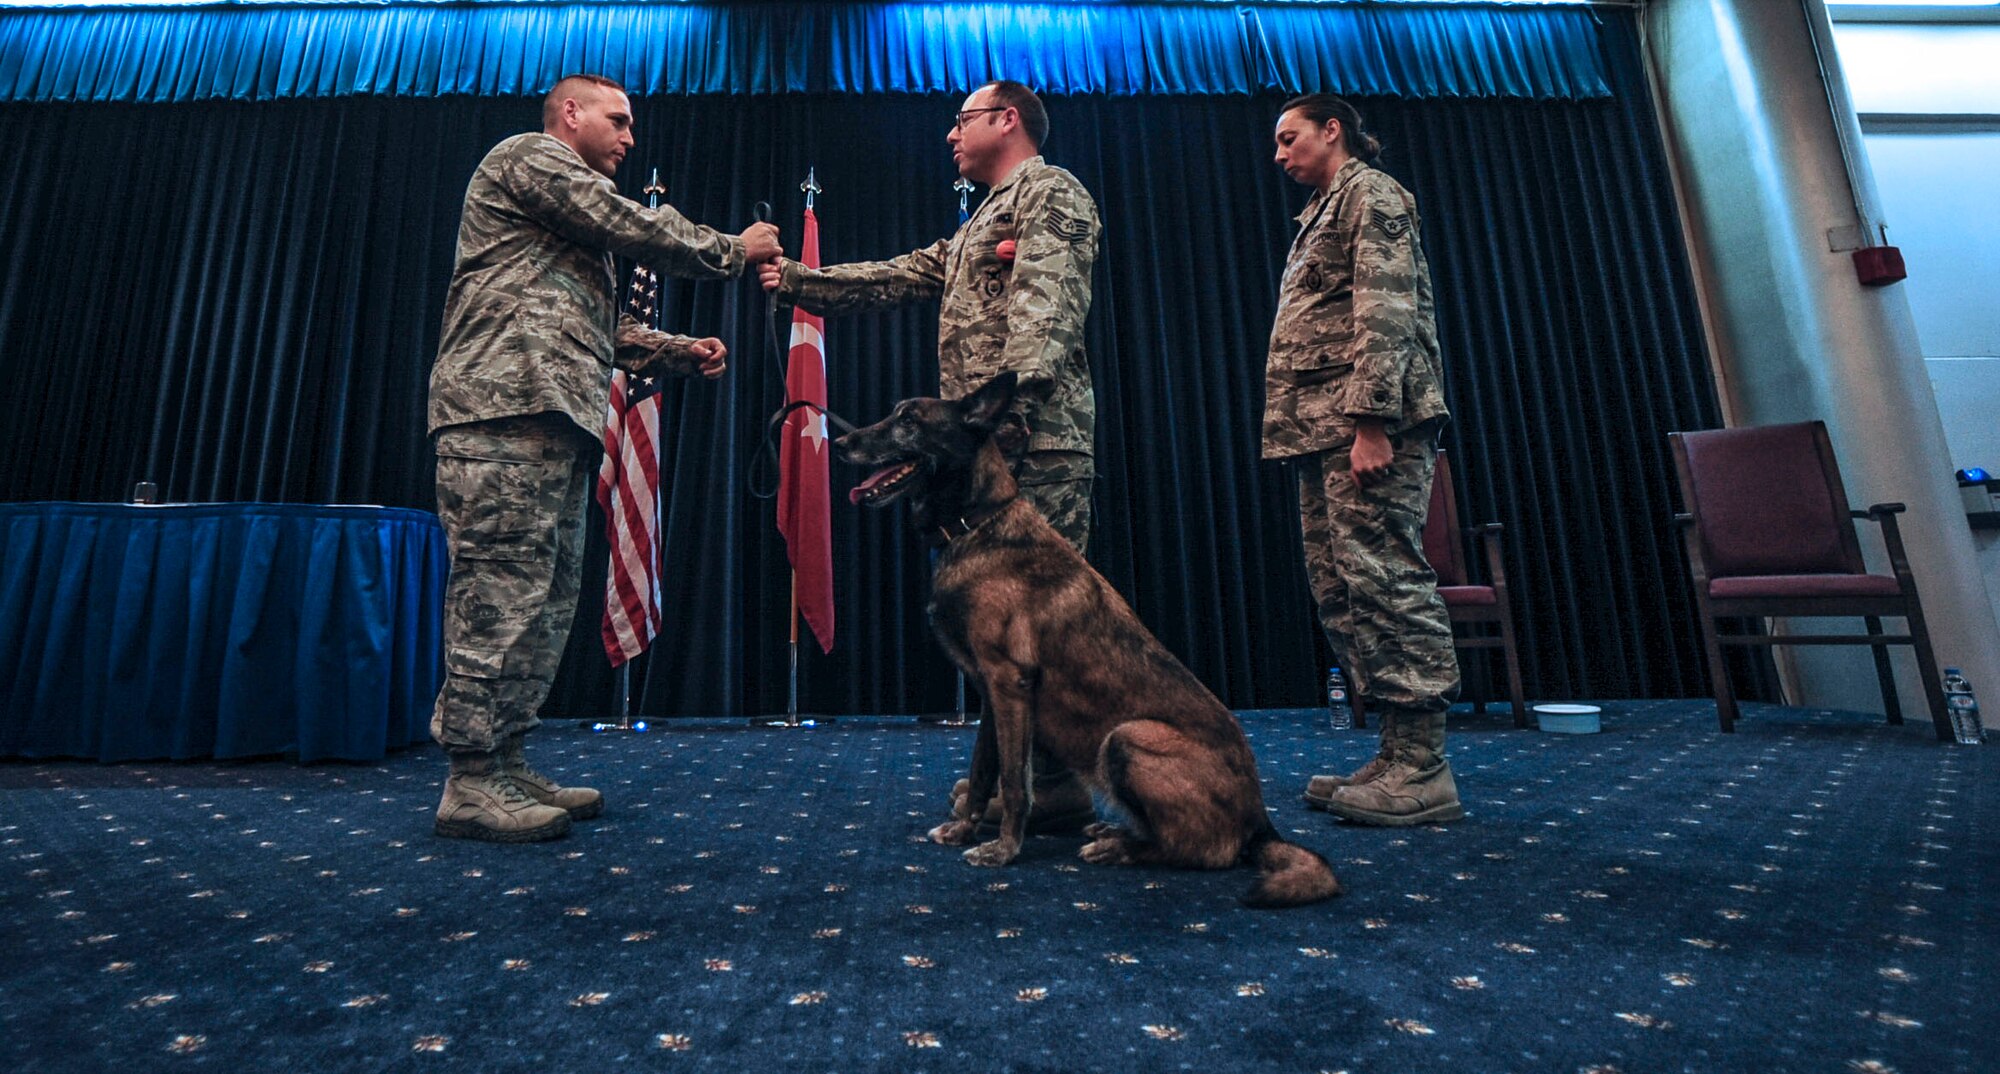 Lt. Col. Joseph Musacchia, 39th Security Forces Squadron commander, takes the leash of military working dog Kira from Tech. Sgt. Kenneth Fresquez, 39th SFS kennel master, Oct. 27, 2014, Incirlik Air Base, Turkey.  Kira has worked as an MWD in the U.S. Air Force for 10 years, eight years stationed on Incirlik AB as a narcotic K-9. (U.S. Air Force photo by Senior Airman Nicole Sikorski/Released)